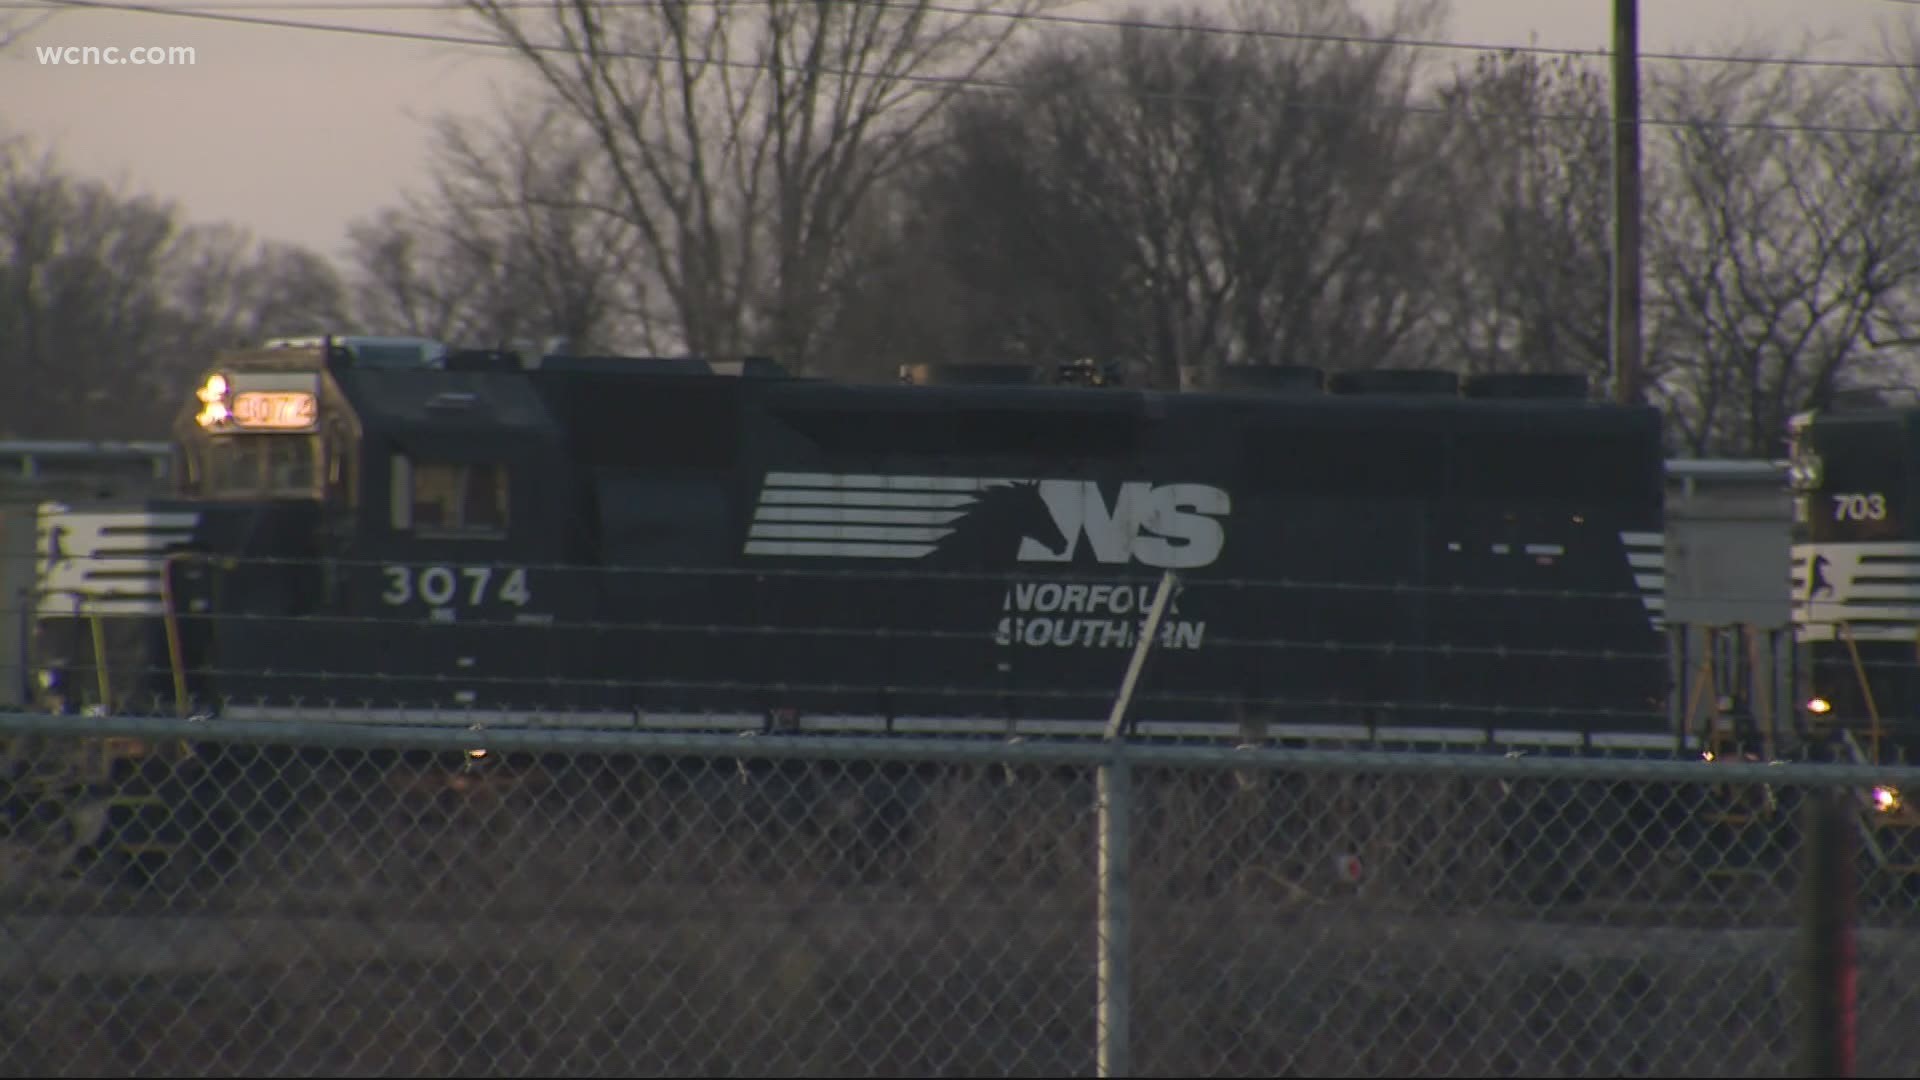 During the city council meeting on Monday, a spokesman for Norfolk Southern emailed WCNC Charlotte's Hunter Sáenz, saying they will not share their tracks.